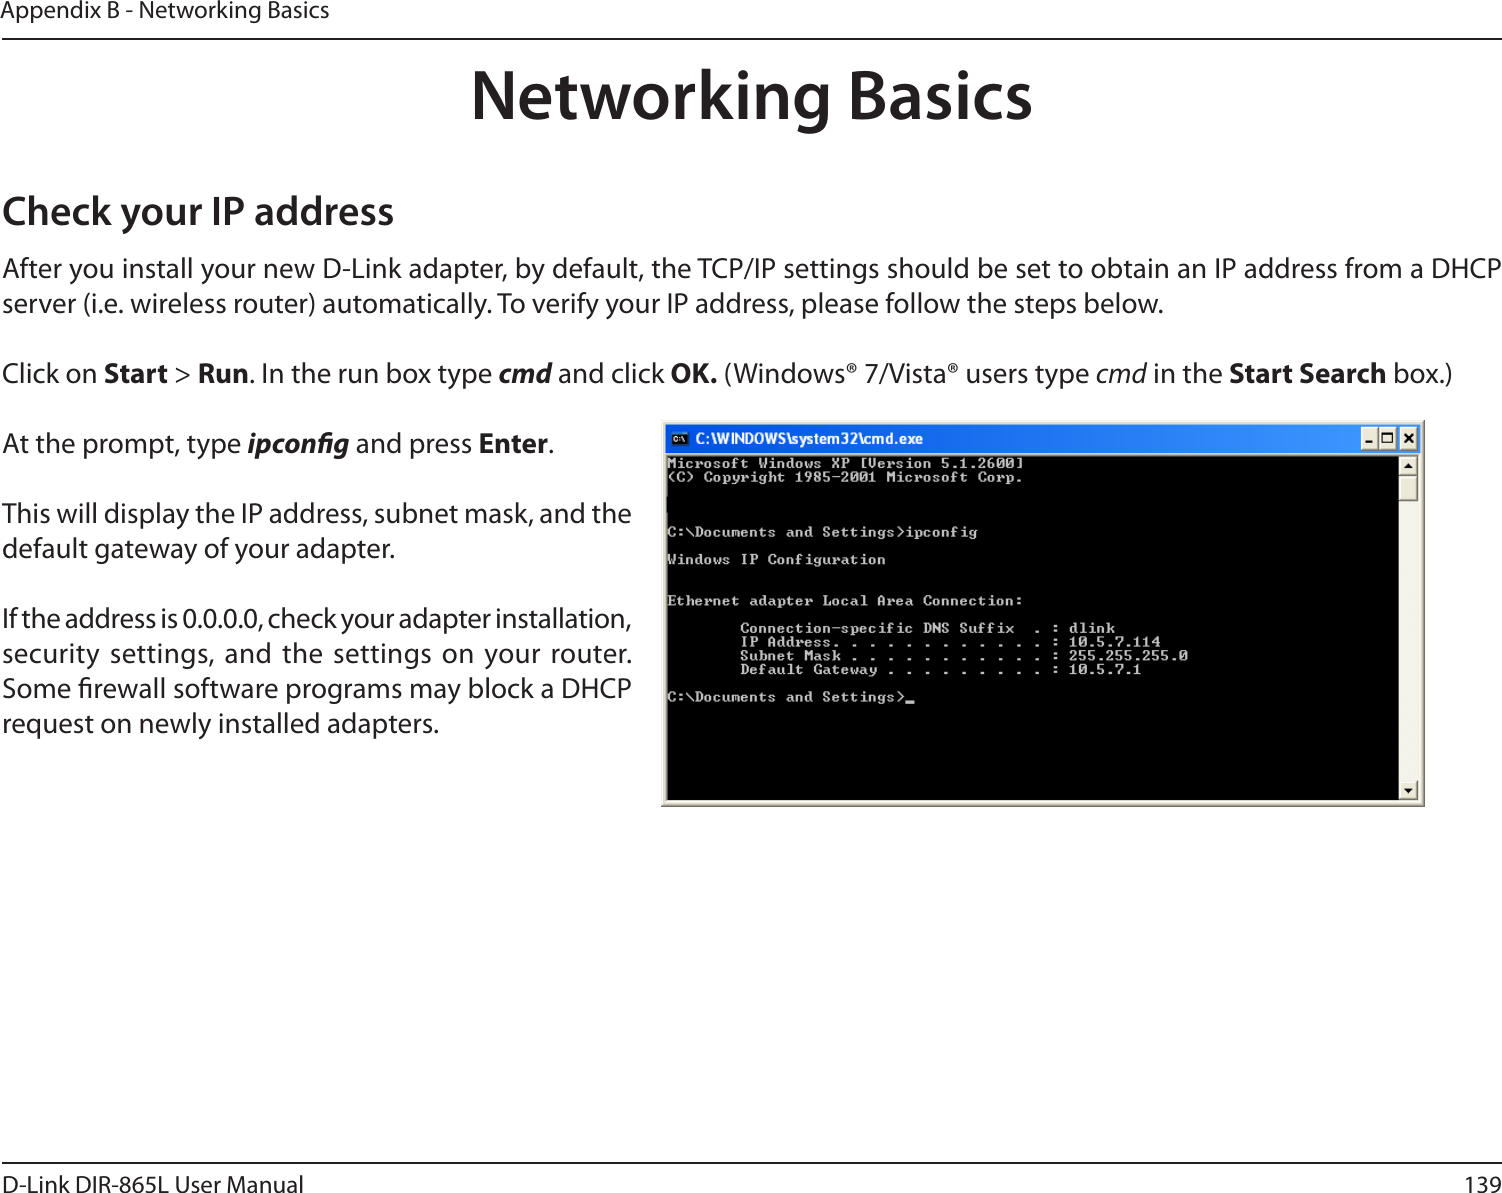 139D-Link DIR-865L User ManualAppendix B - Networking BasicsNetworking BasicsCheck your IP addressAfter you install your new D-Link adapter, by default, the TCP/IP settings should be set to obtain an IP address from a DHCP server (i.e. wireless router) automatically. To verify your IP address, please follow the steps below.Click on Start &gt; Run. In the run box type cmd and click OK. (Windows® 7/Vista® users type cmd in the Start Search box.)At the prompt, type ipcong and press Enter.This will display the IP address, subnet mask, and the default gateway of your adapter.If the address is 0.0.0.0, check your adapter installation, security  settings, and  the settings on your router. Some rewall software programs may block a DHCP request on newly installed adapters. 